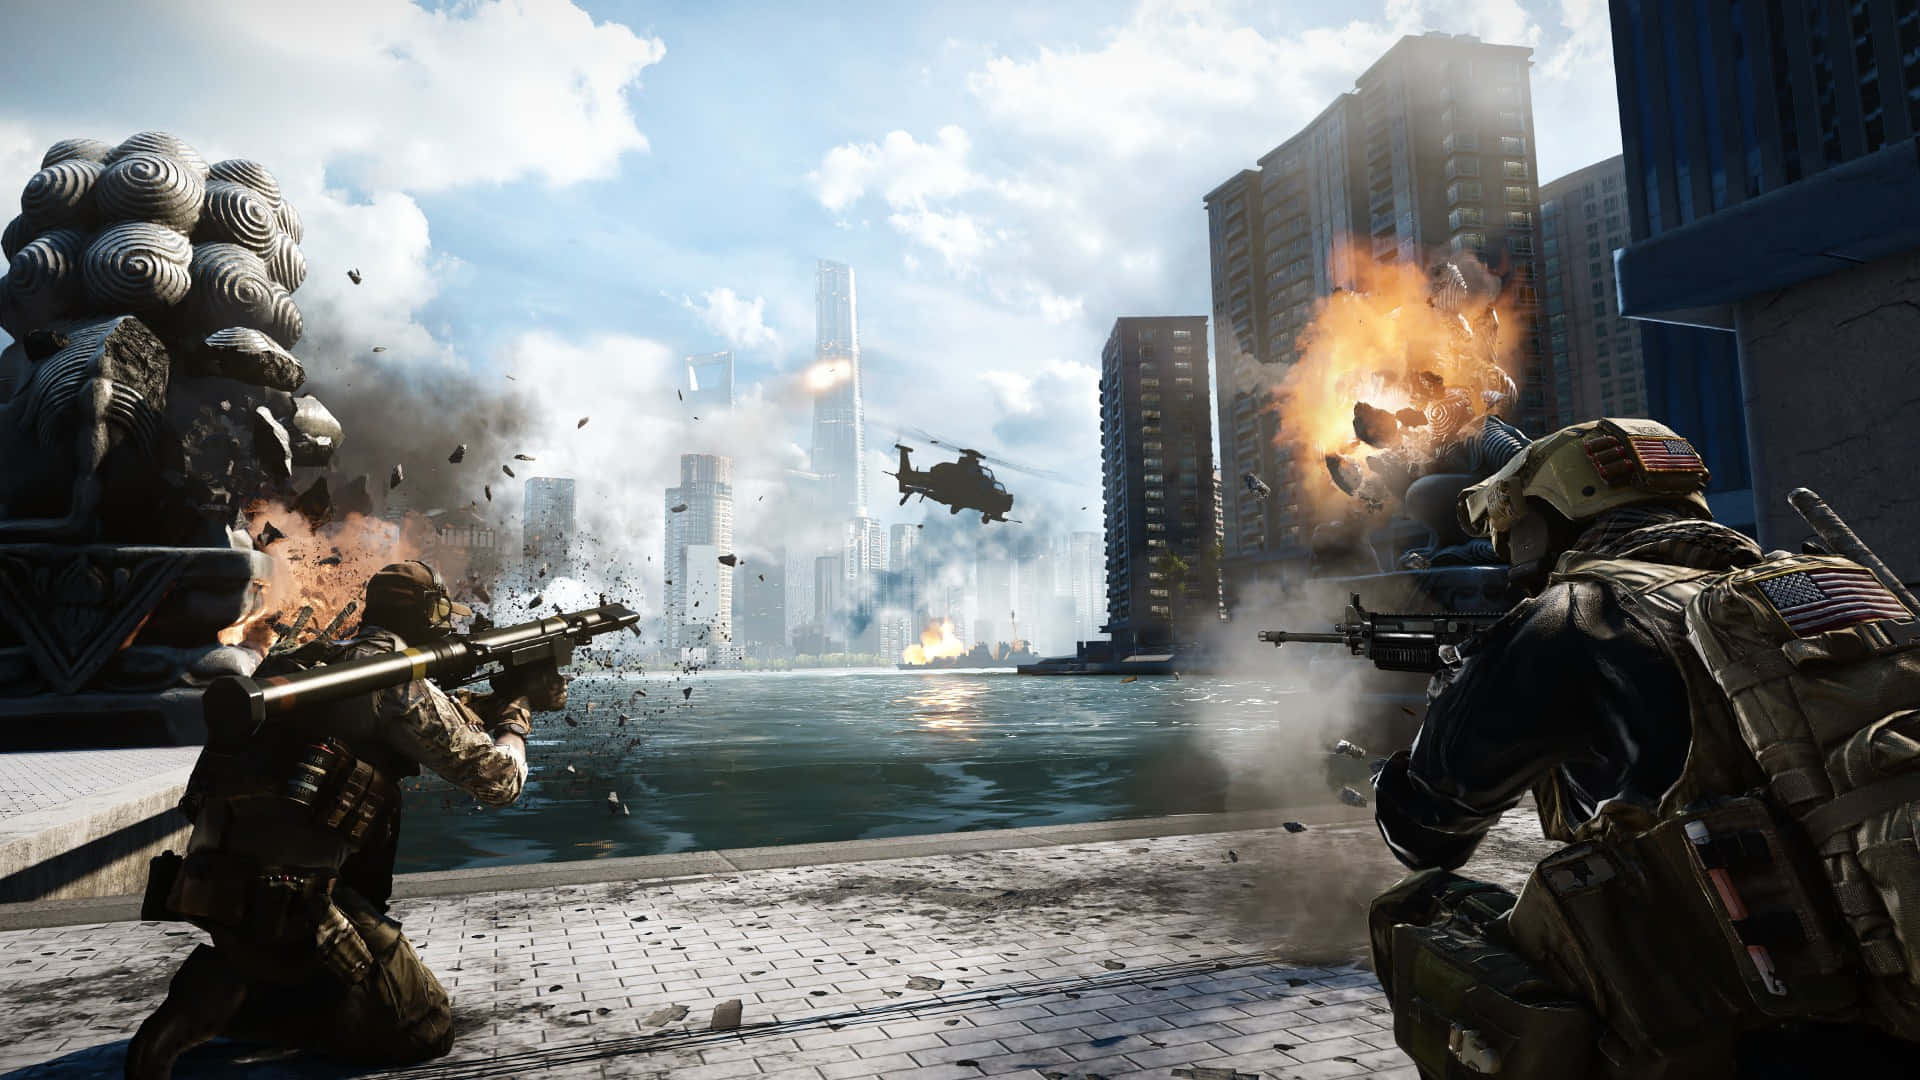 "Outwit and Outplay Your Enemies with Battlefield 4"